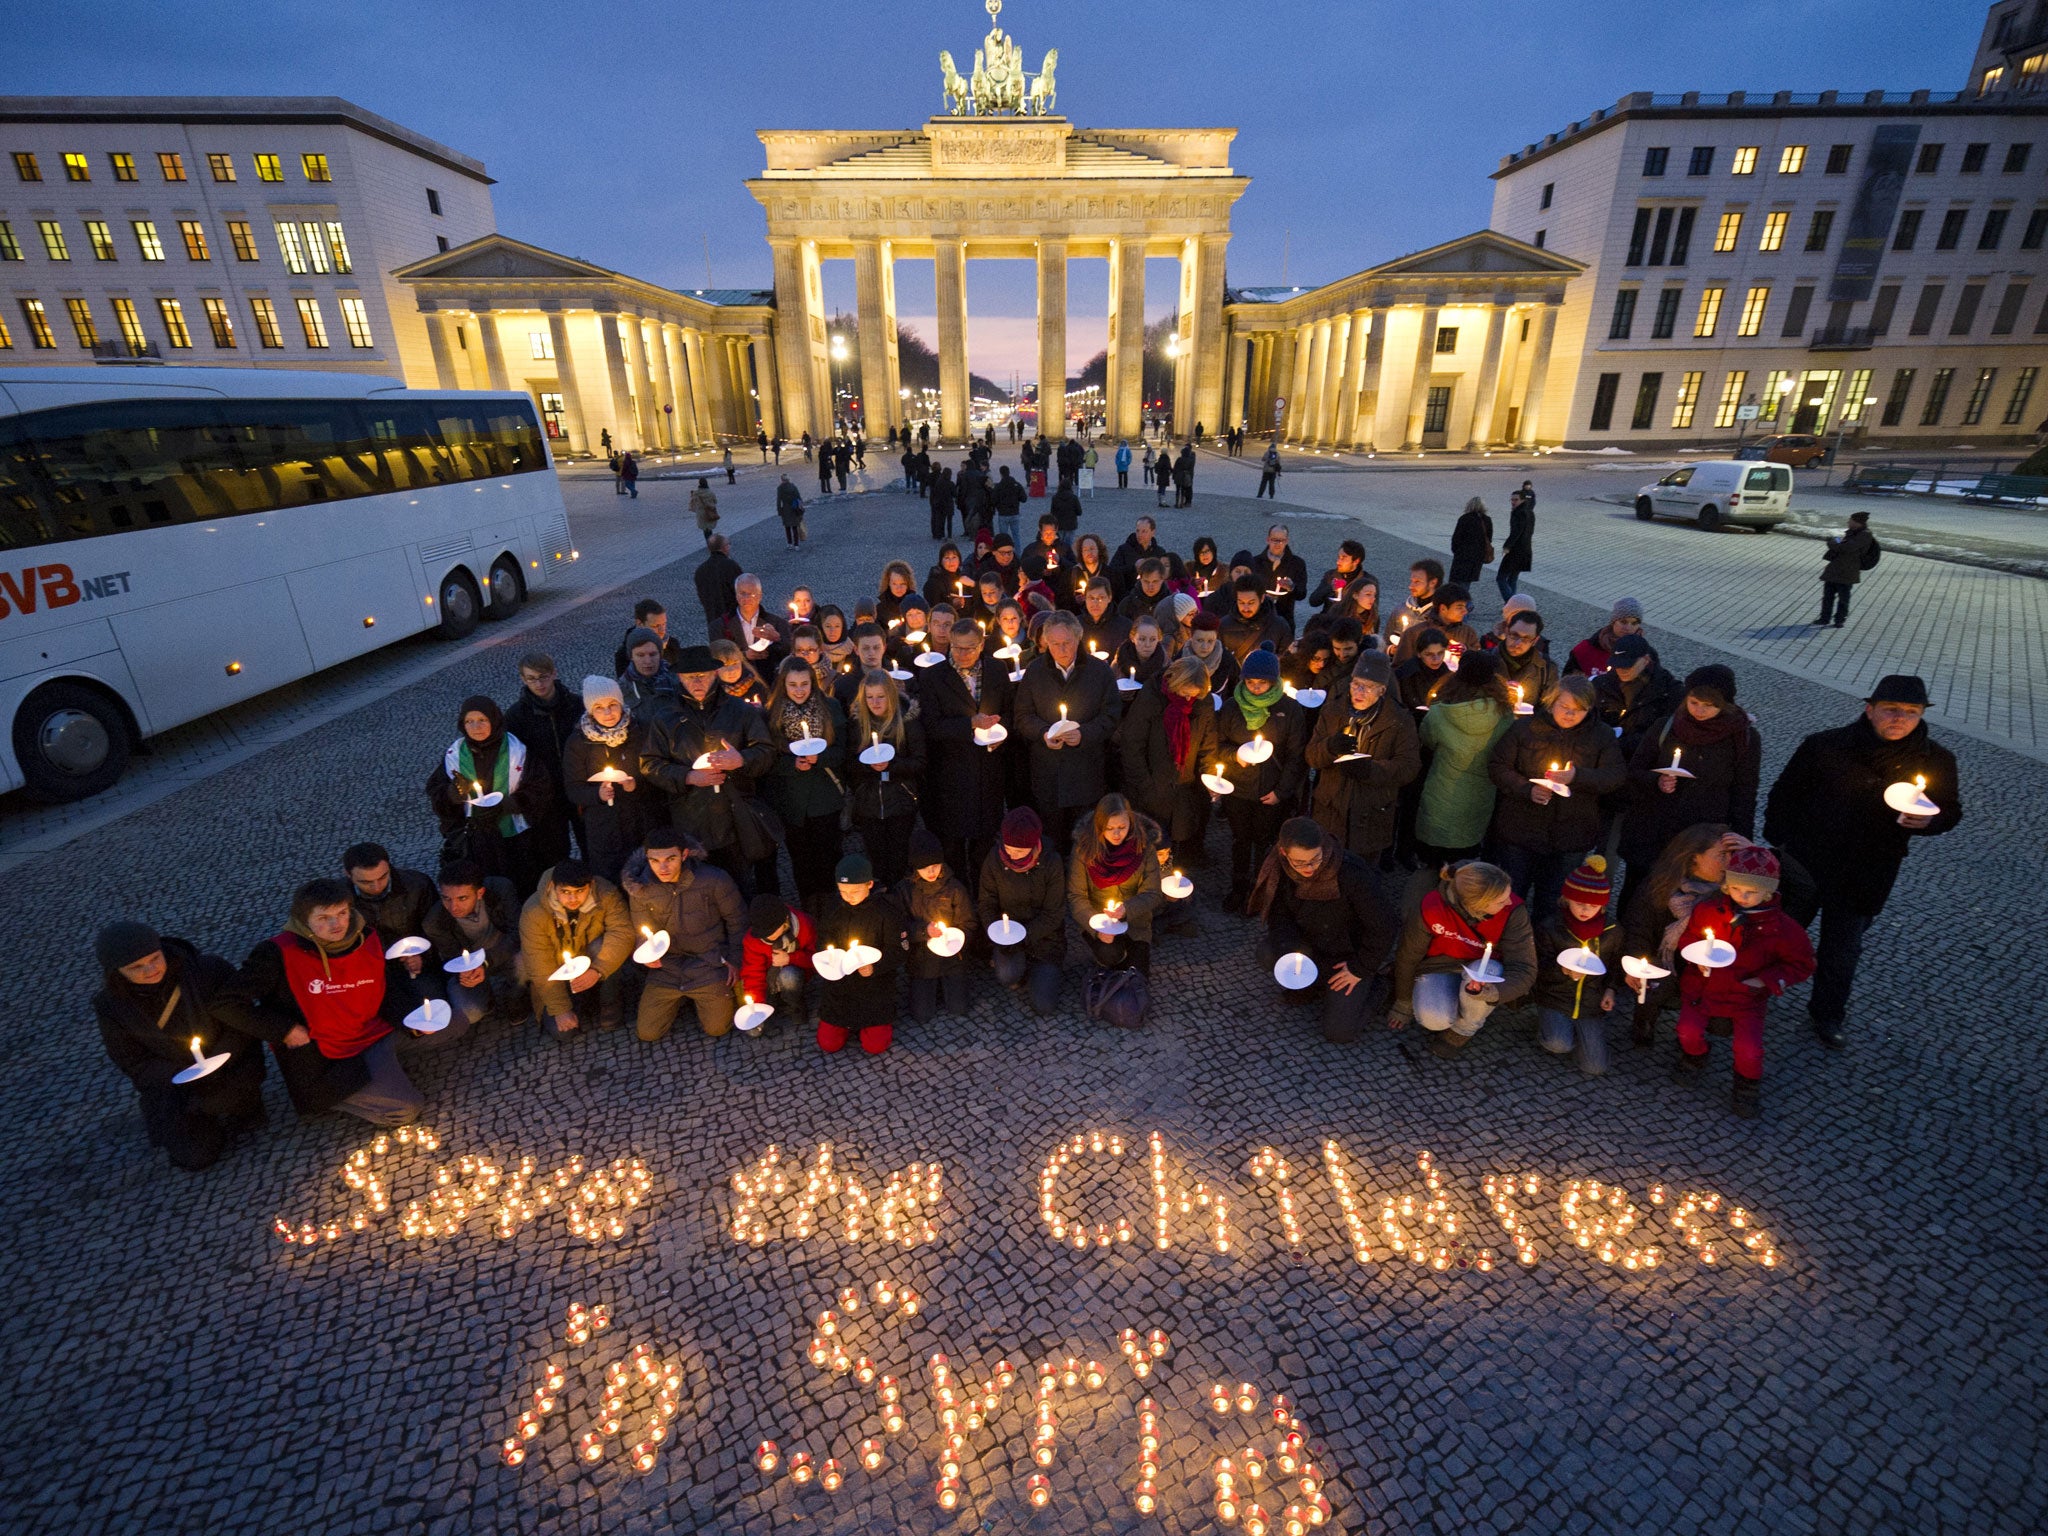 Save the Children has been campaigning for victims of the Syrian war